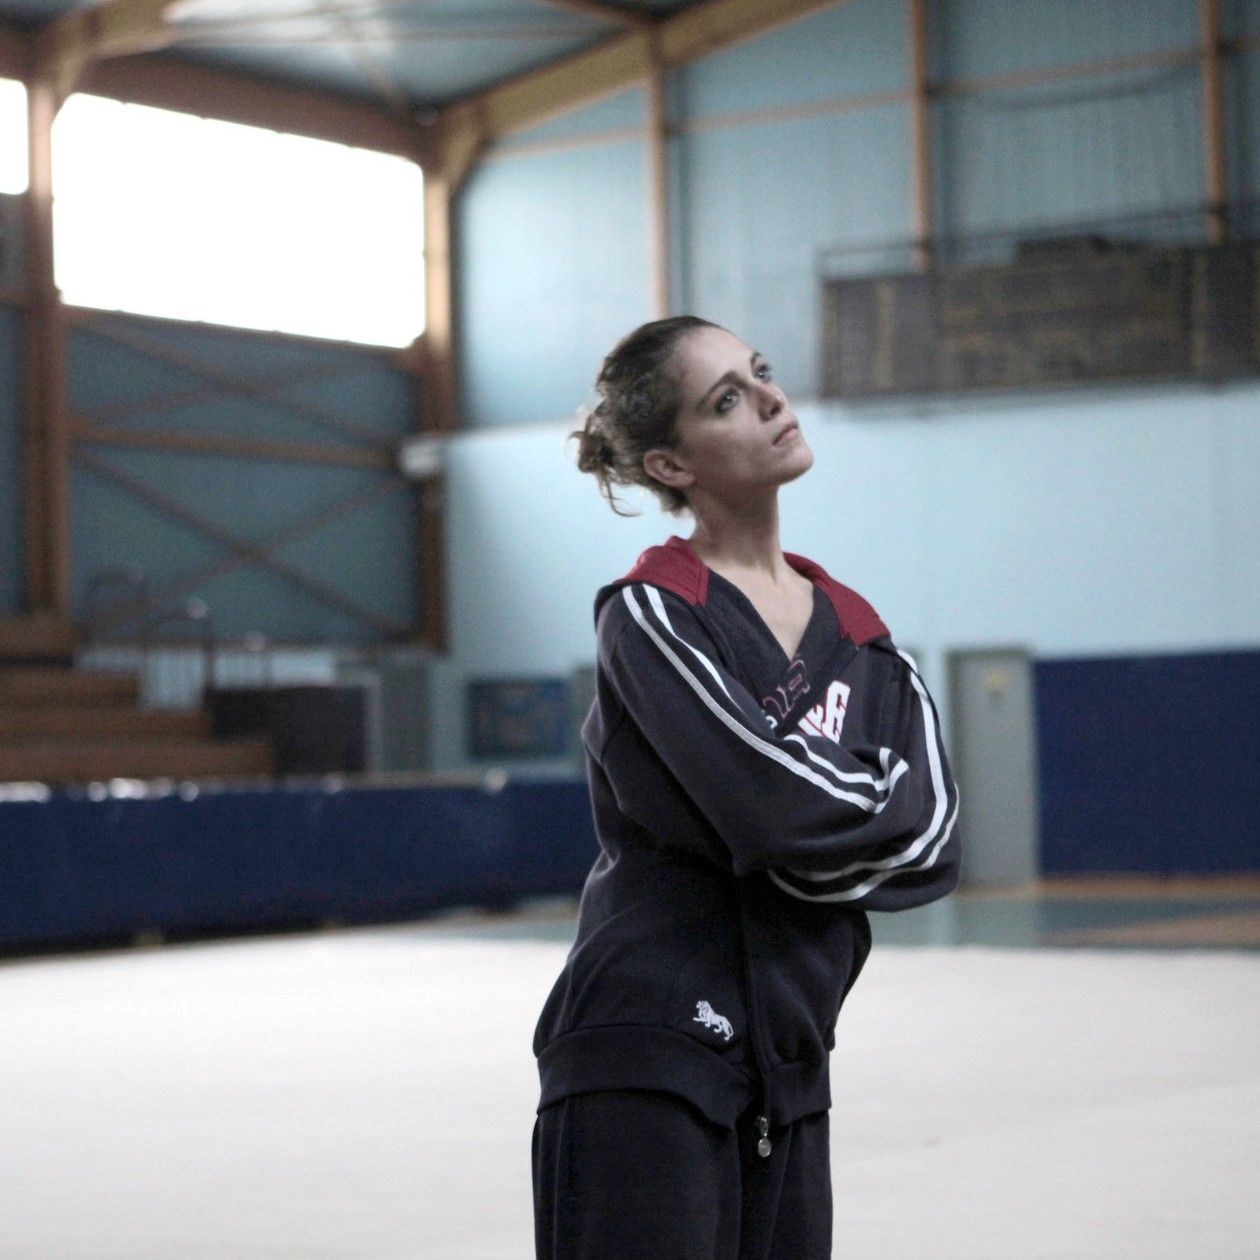 Ariane Labed : Gymnast / Alps, 2011 produced by Athina Rachel Tsangari and Yorgos Lanthimos and directed by Lanthimos